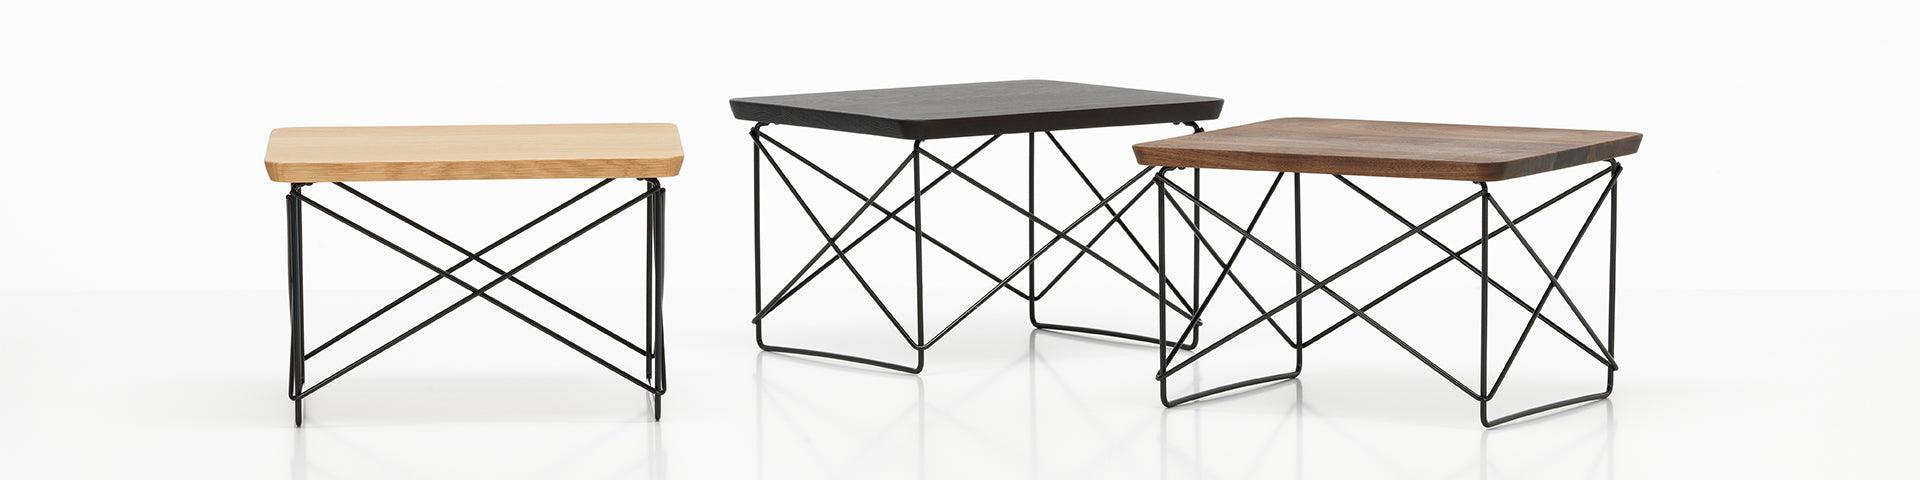 Eames LTR occasional table, 1950